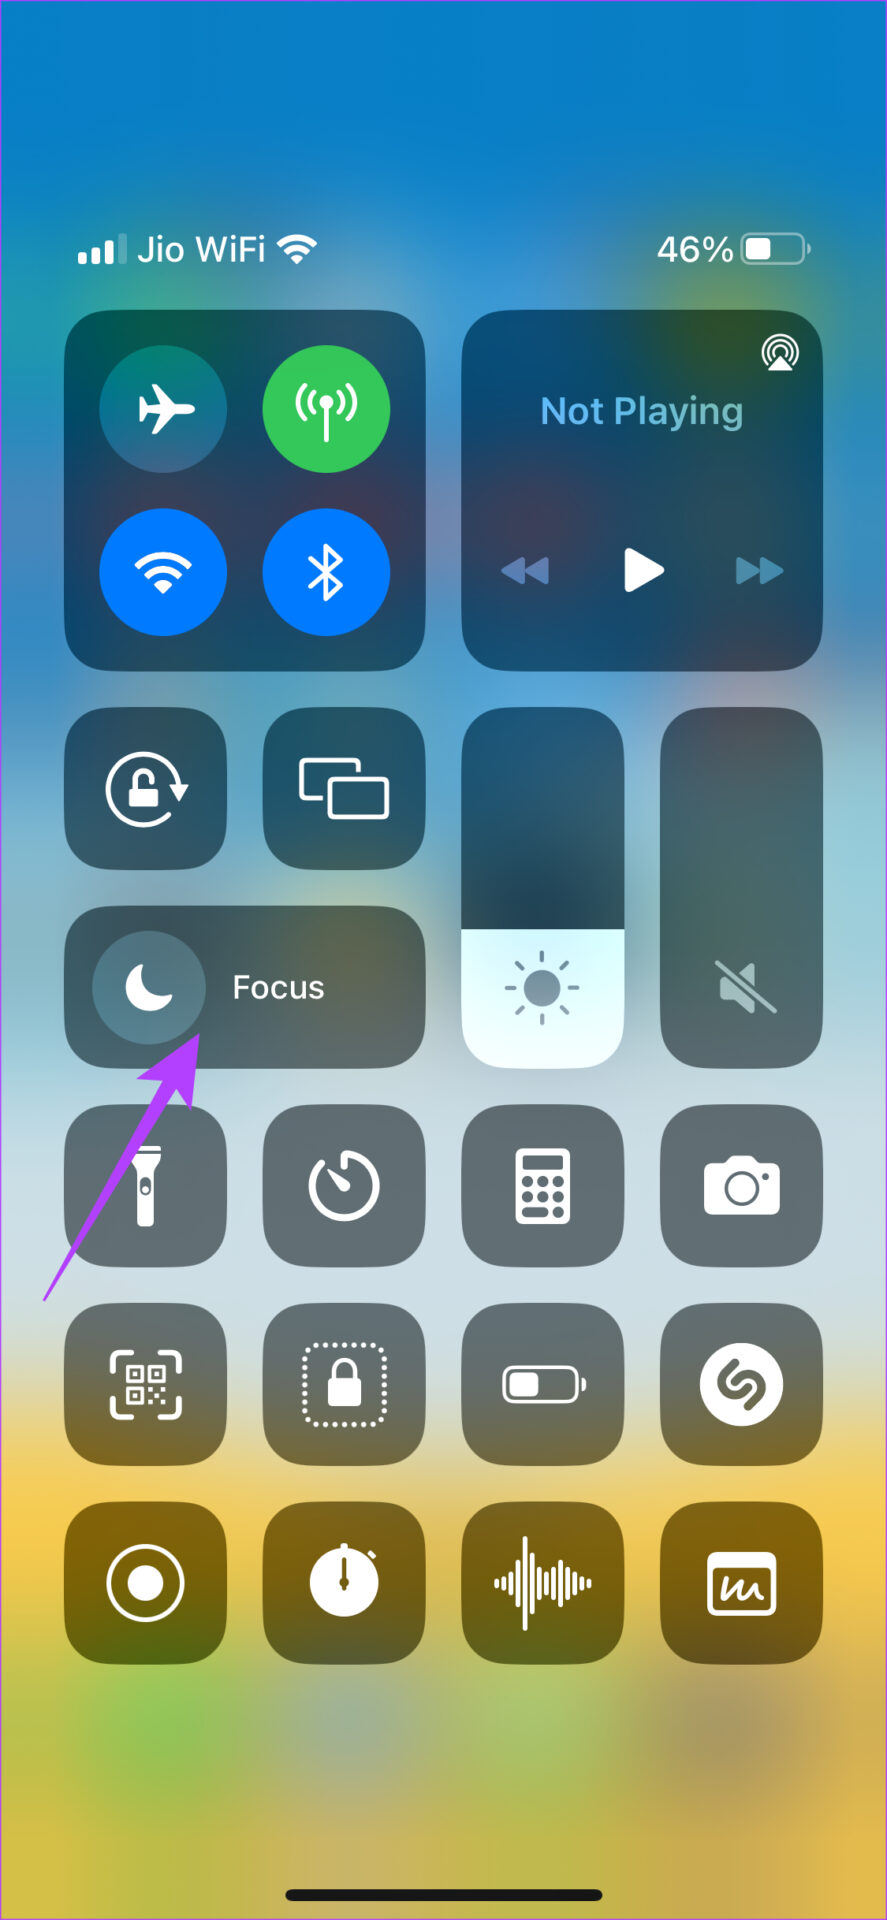 Go to control center on iPhone